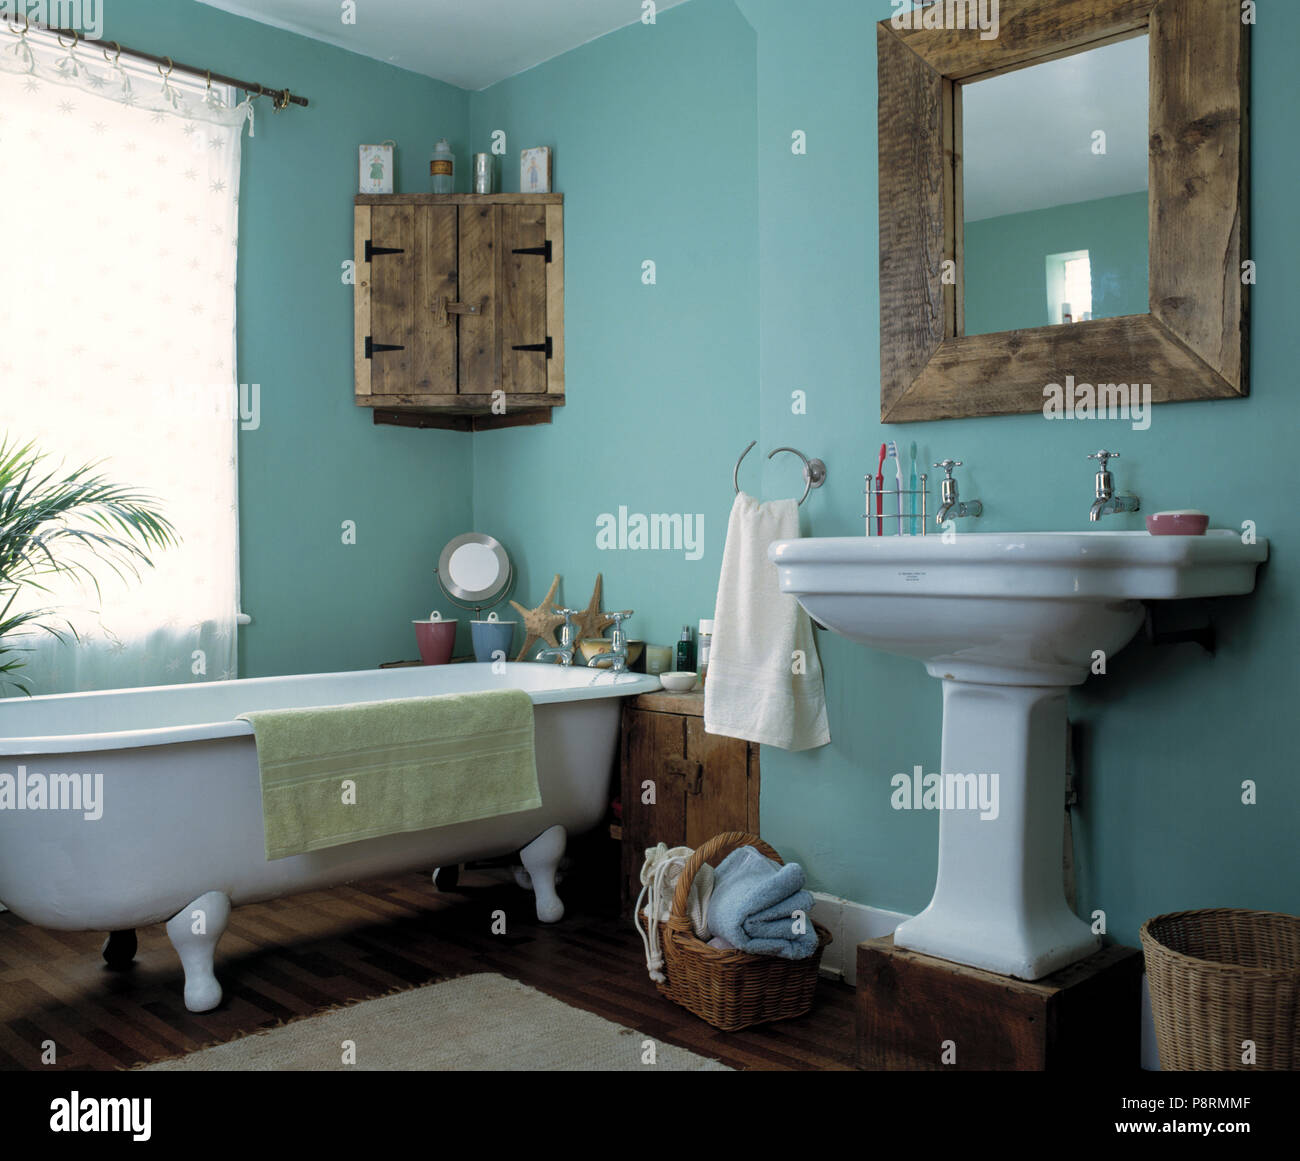 Rustic wooden mirror and corner cupboard in pale turquoise economy style bathroom with roll top bath and pedestal basin Stock Photo